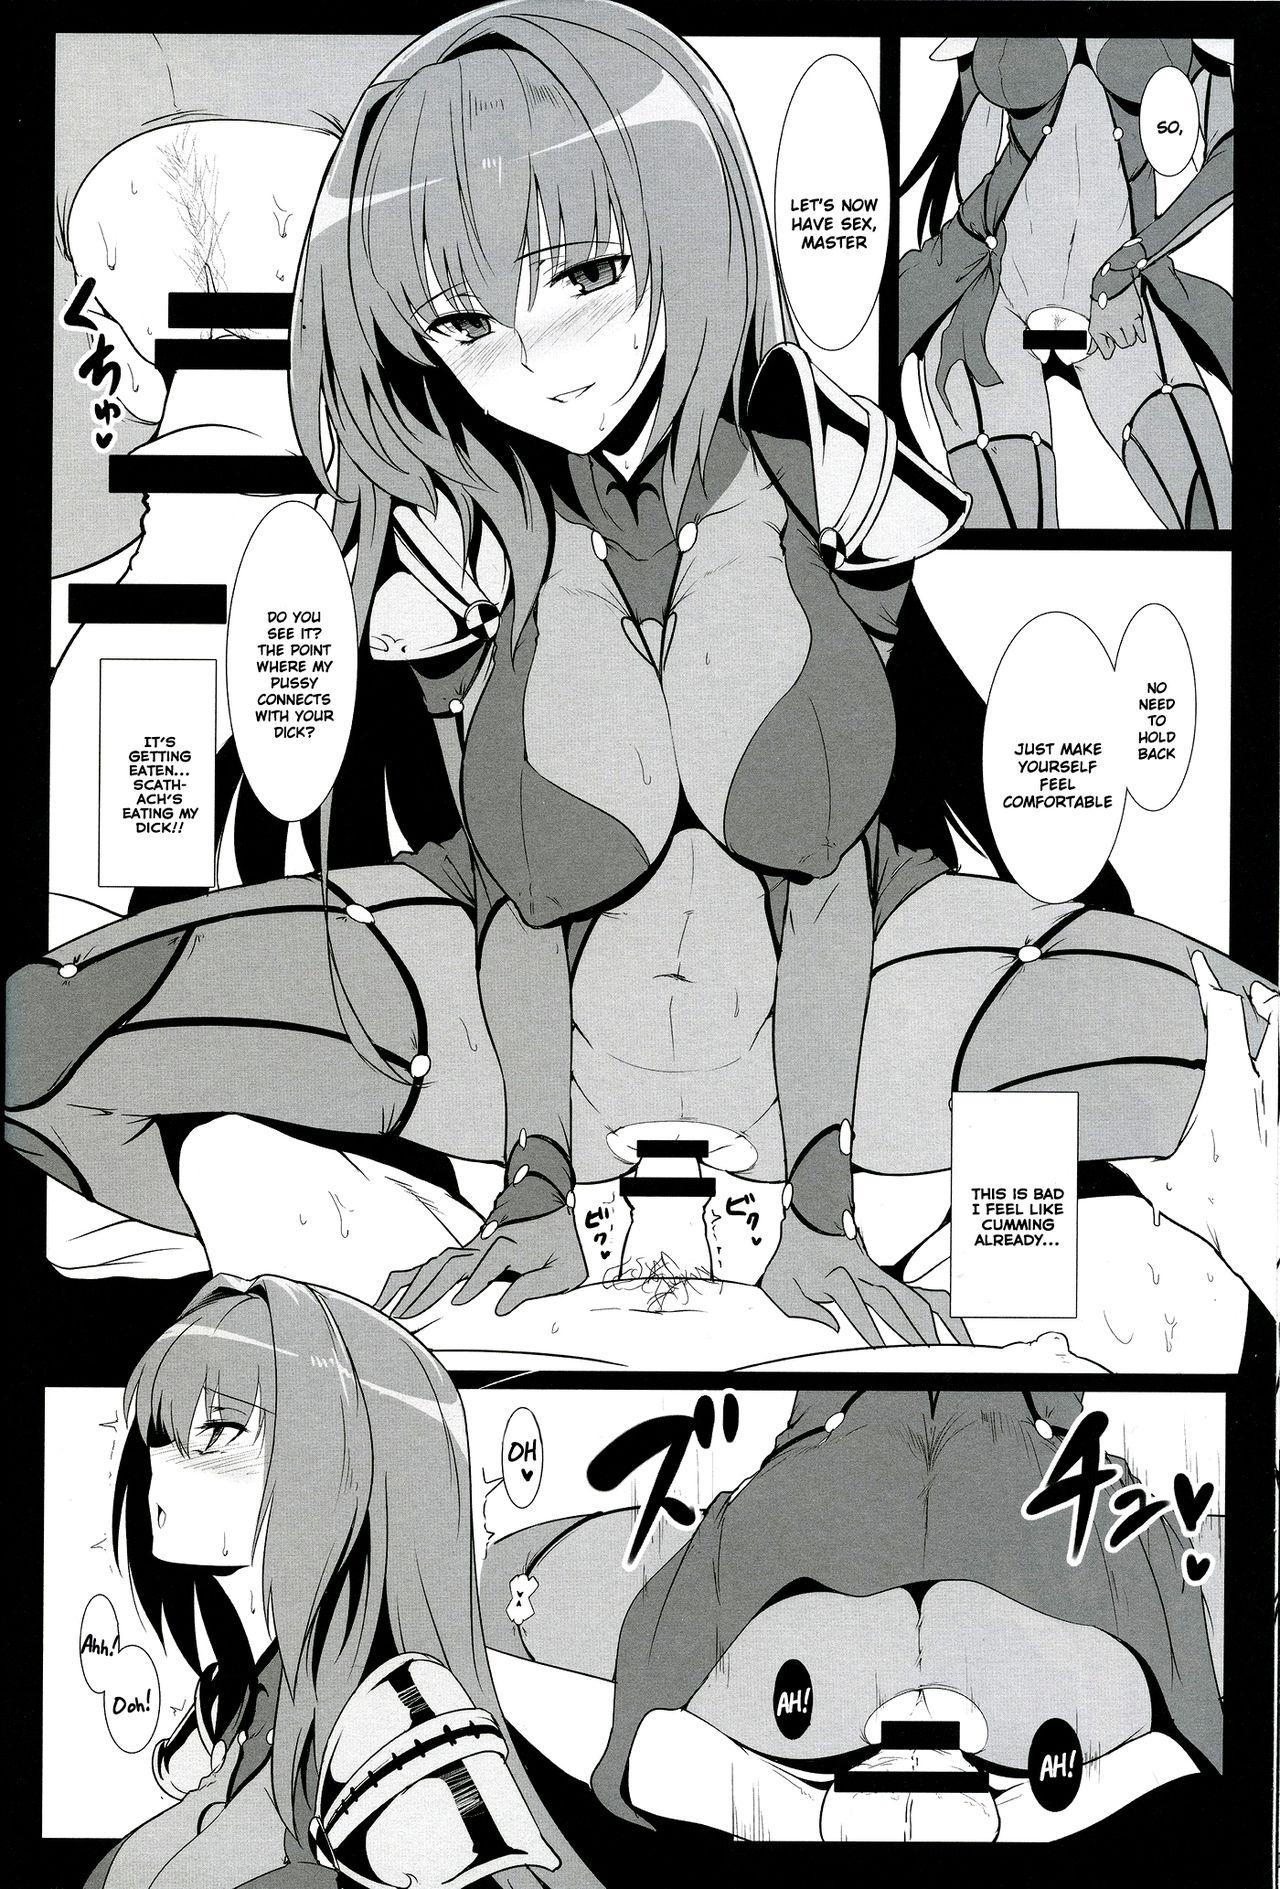 Bottom AH! MY MISTRESS! - Fate grand order Flexible - Page 13